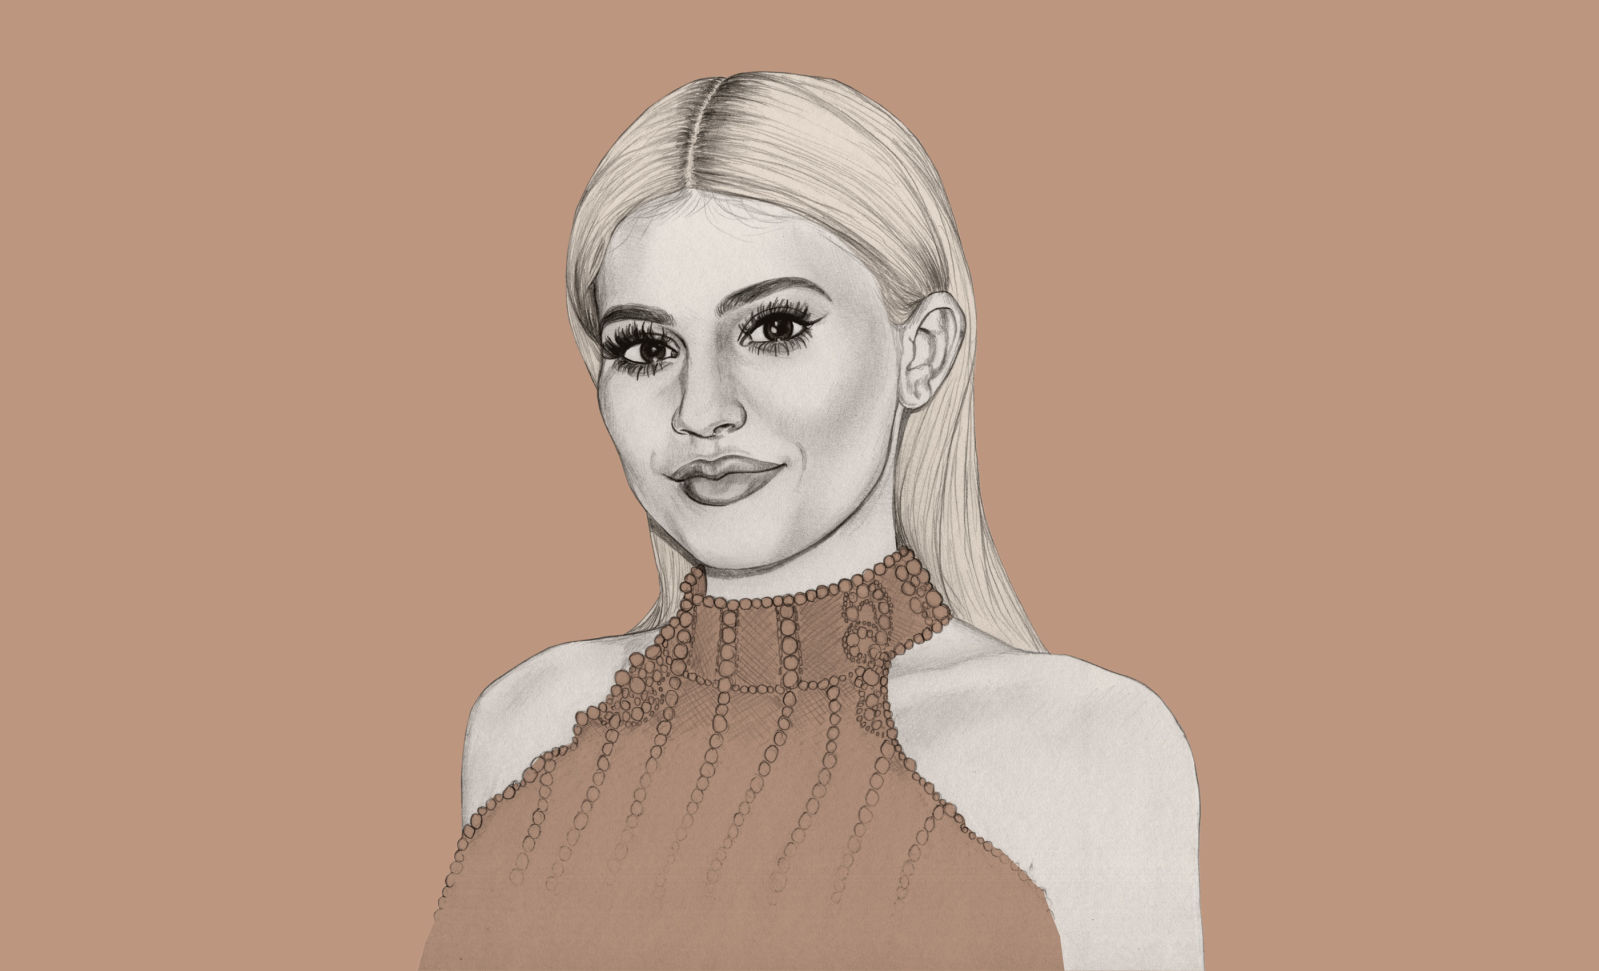 At 19 years old, Kylie understands what it means to be a frugal Jenner. Like: Say no to the $40,000 watch.